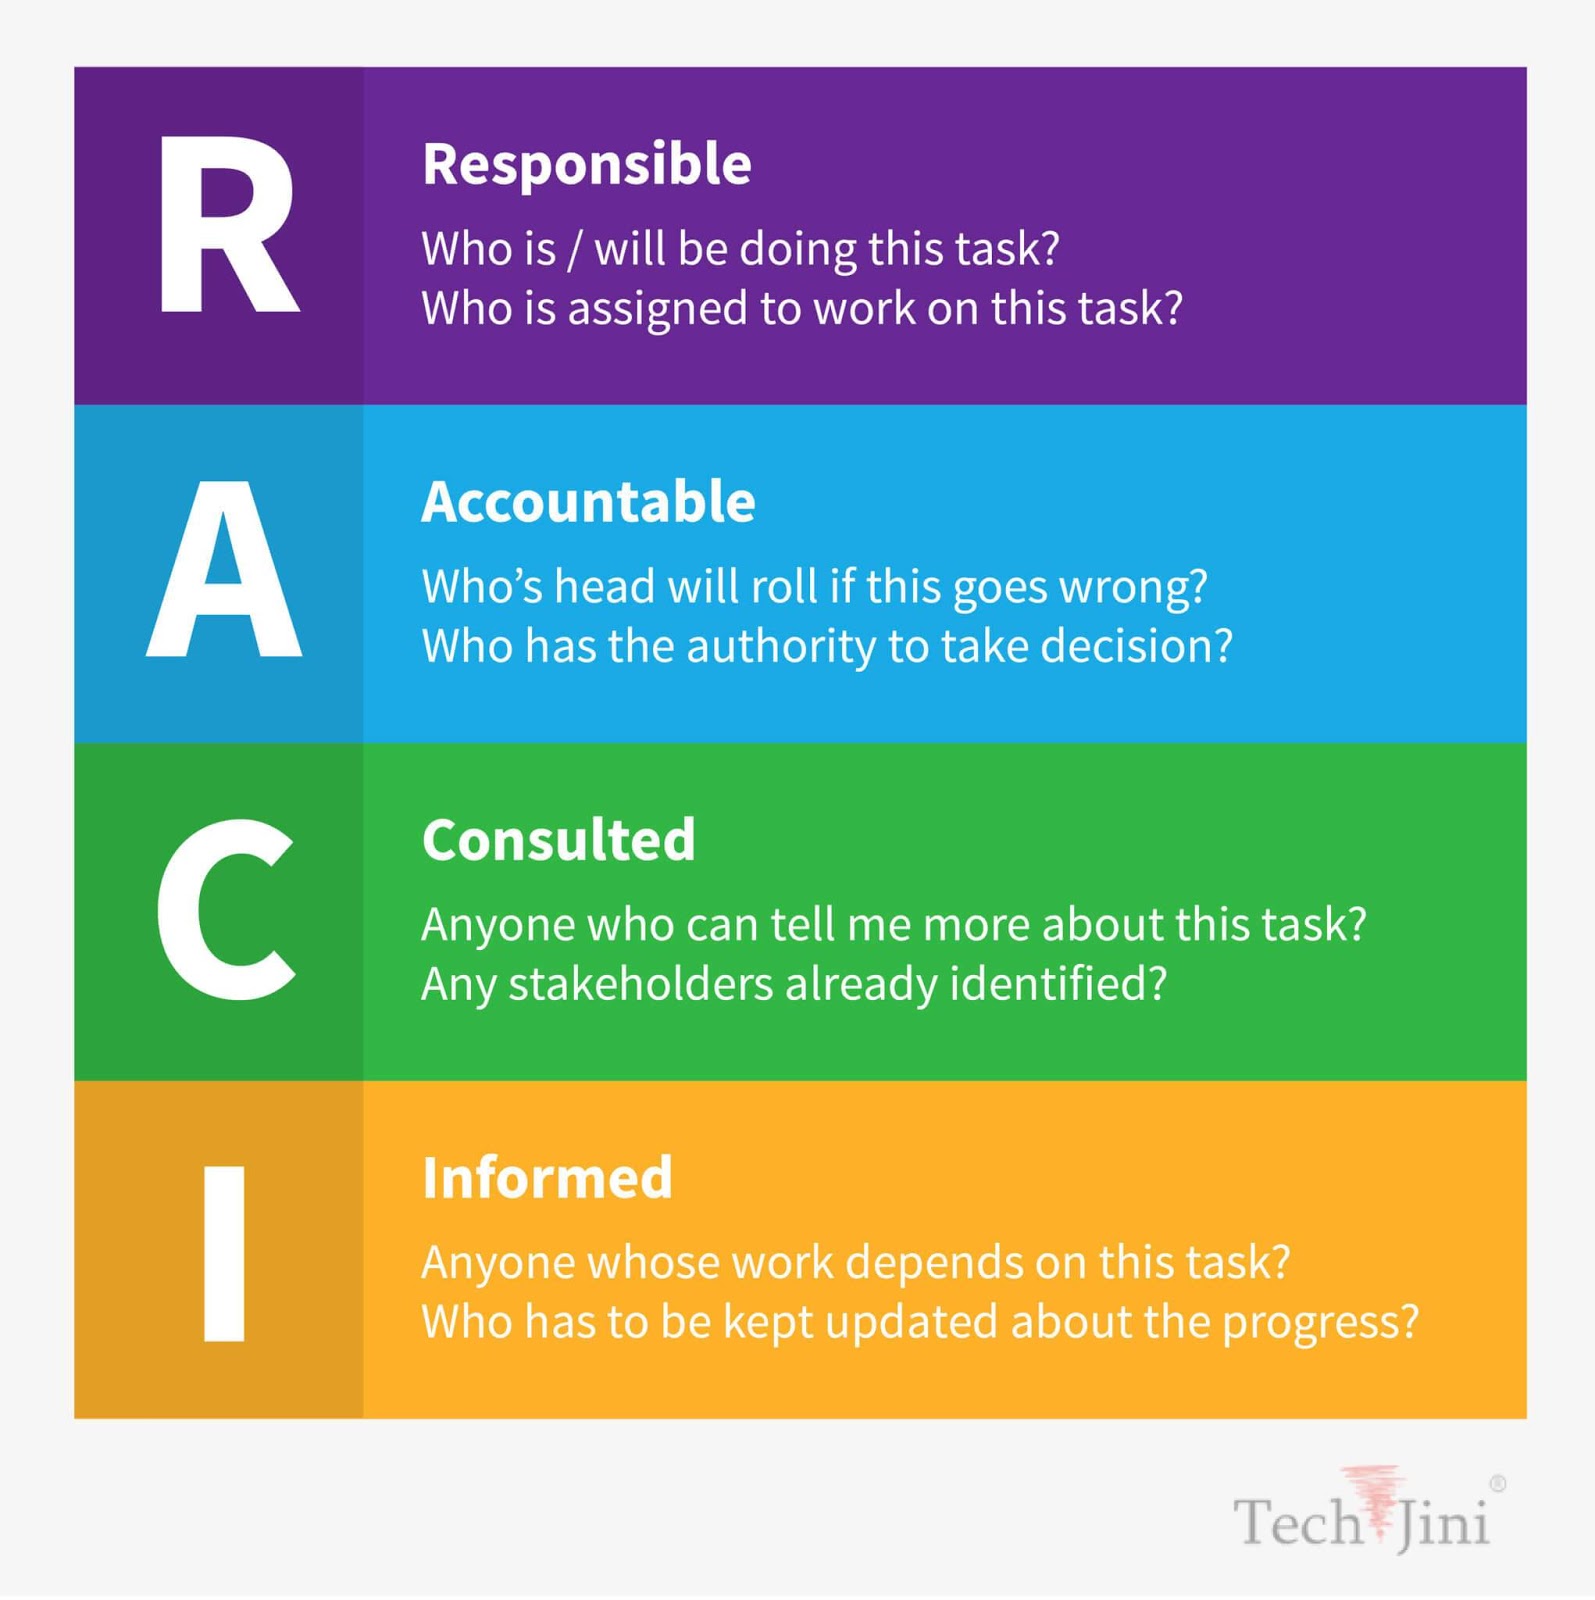 How to start an RFP: Align your stakeholders through RACI, first